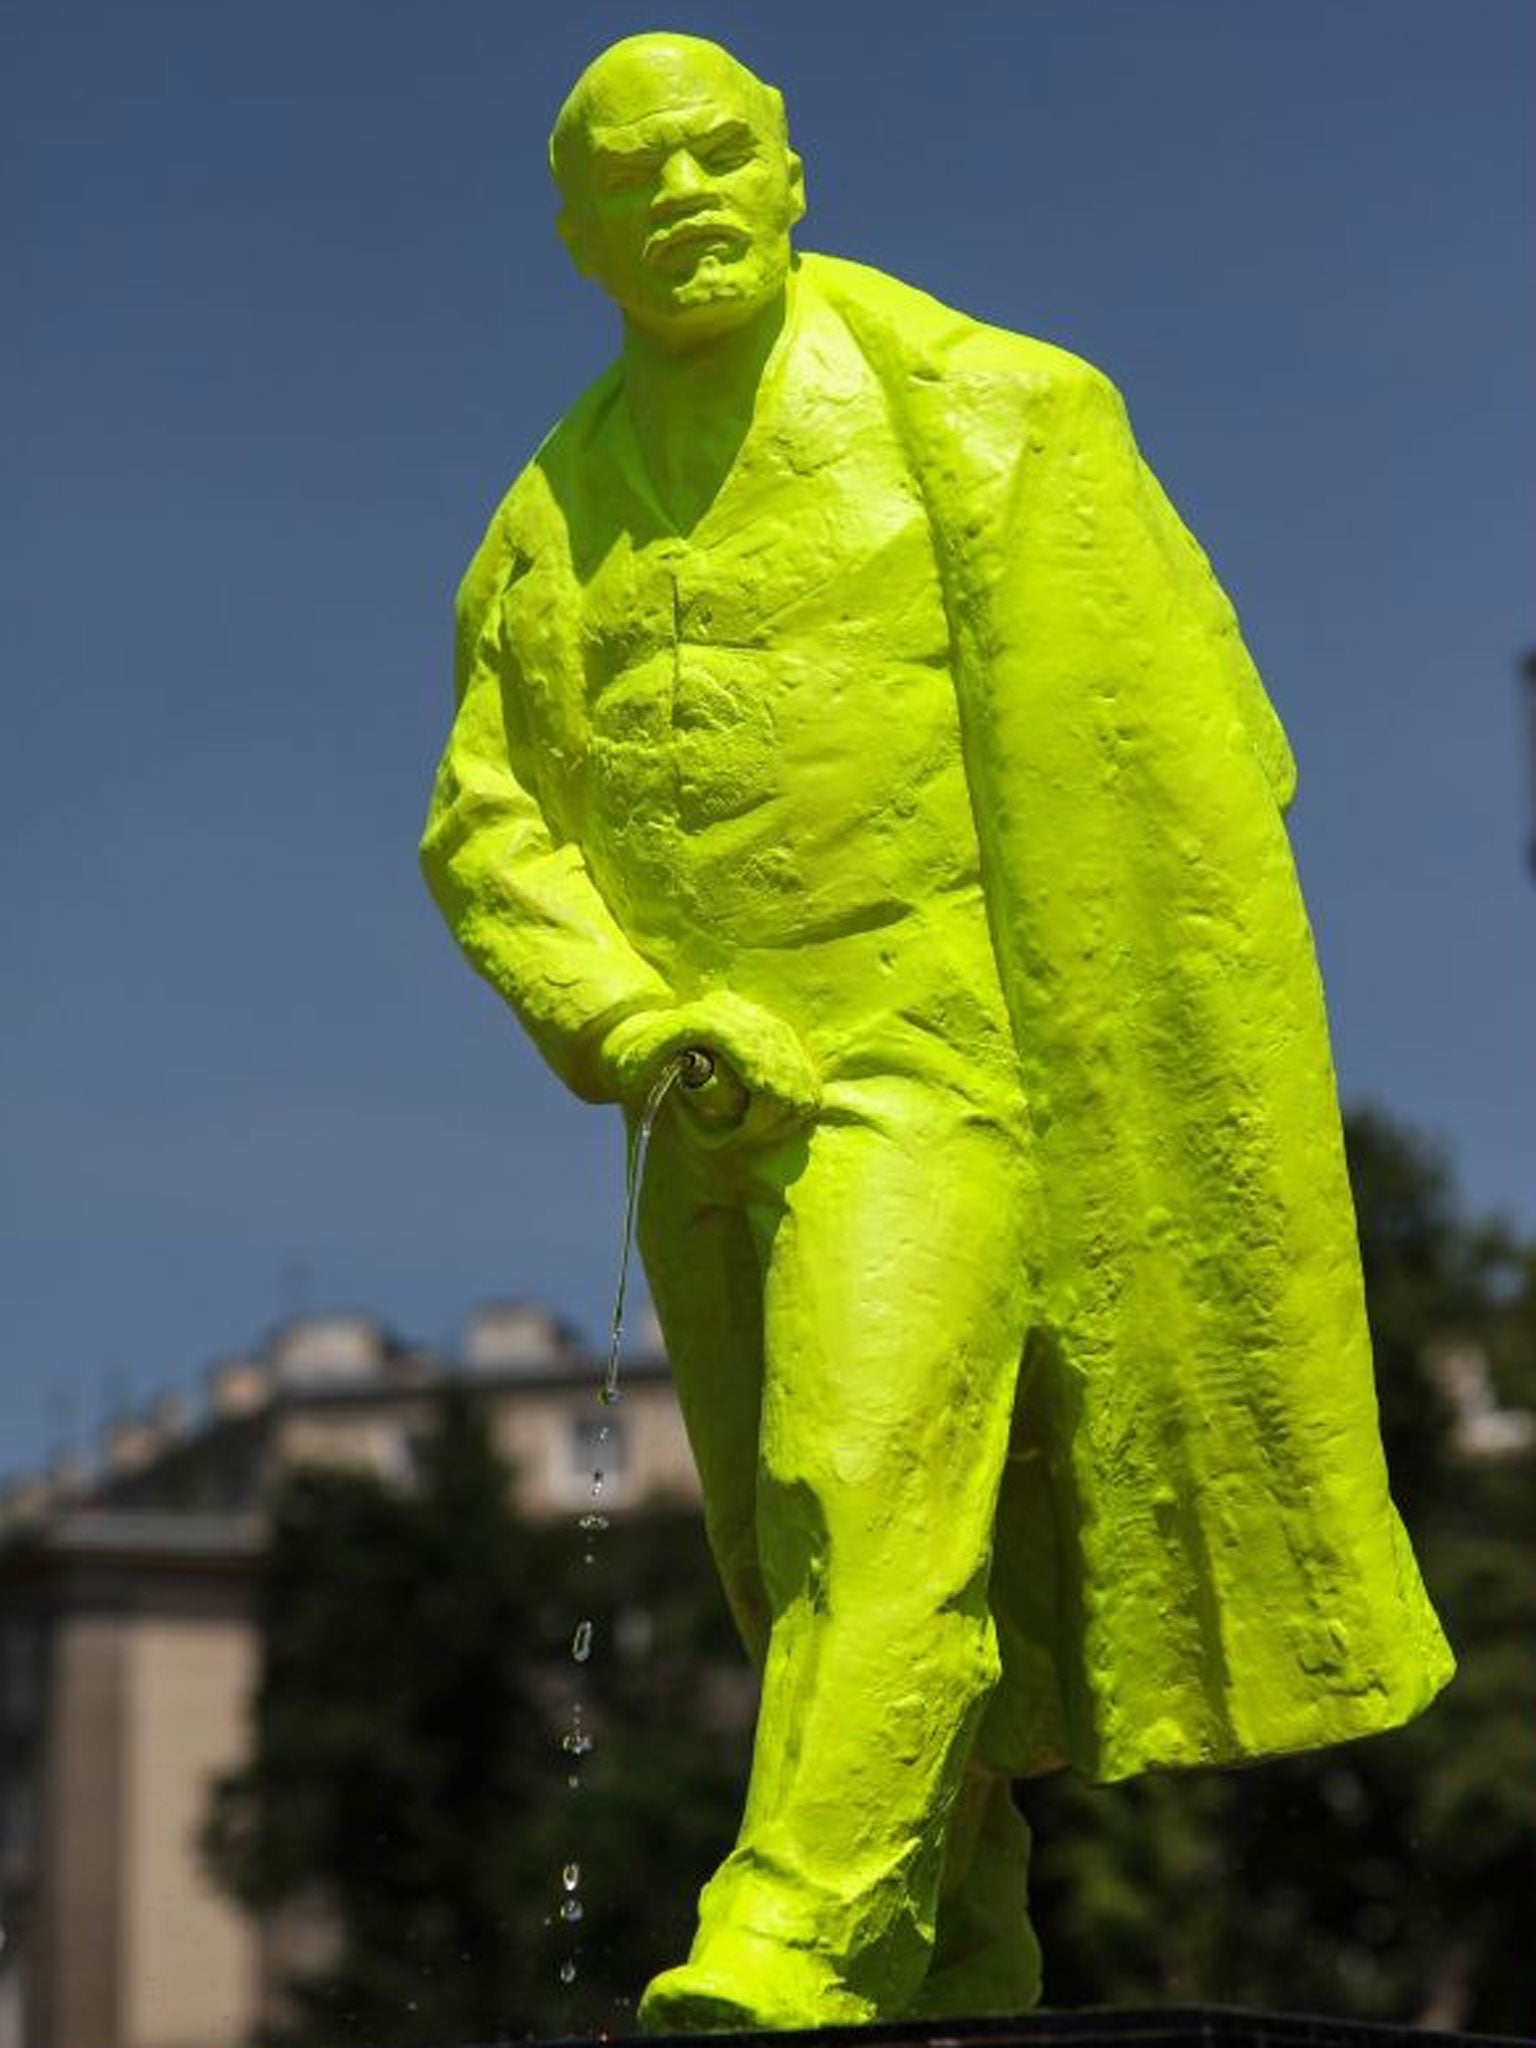 Urinating Lenin statue at the Grolsch Artboom Festival, Cracow, Poland